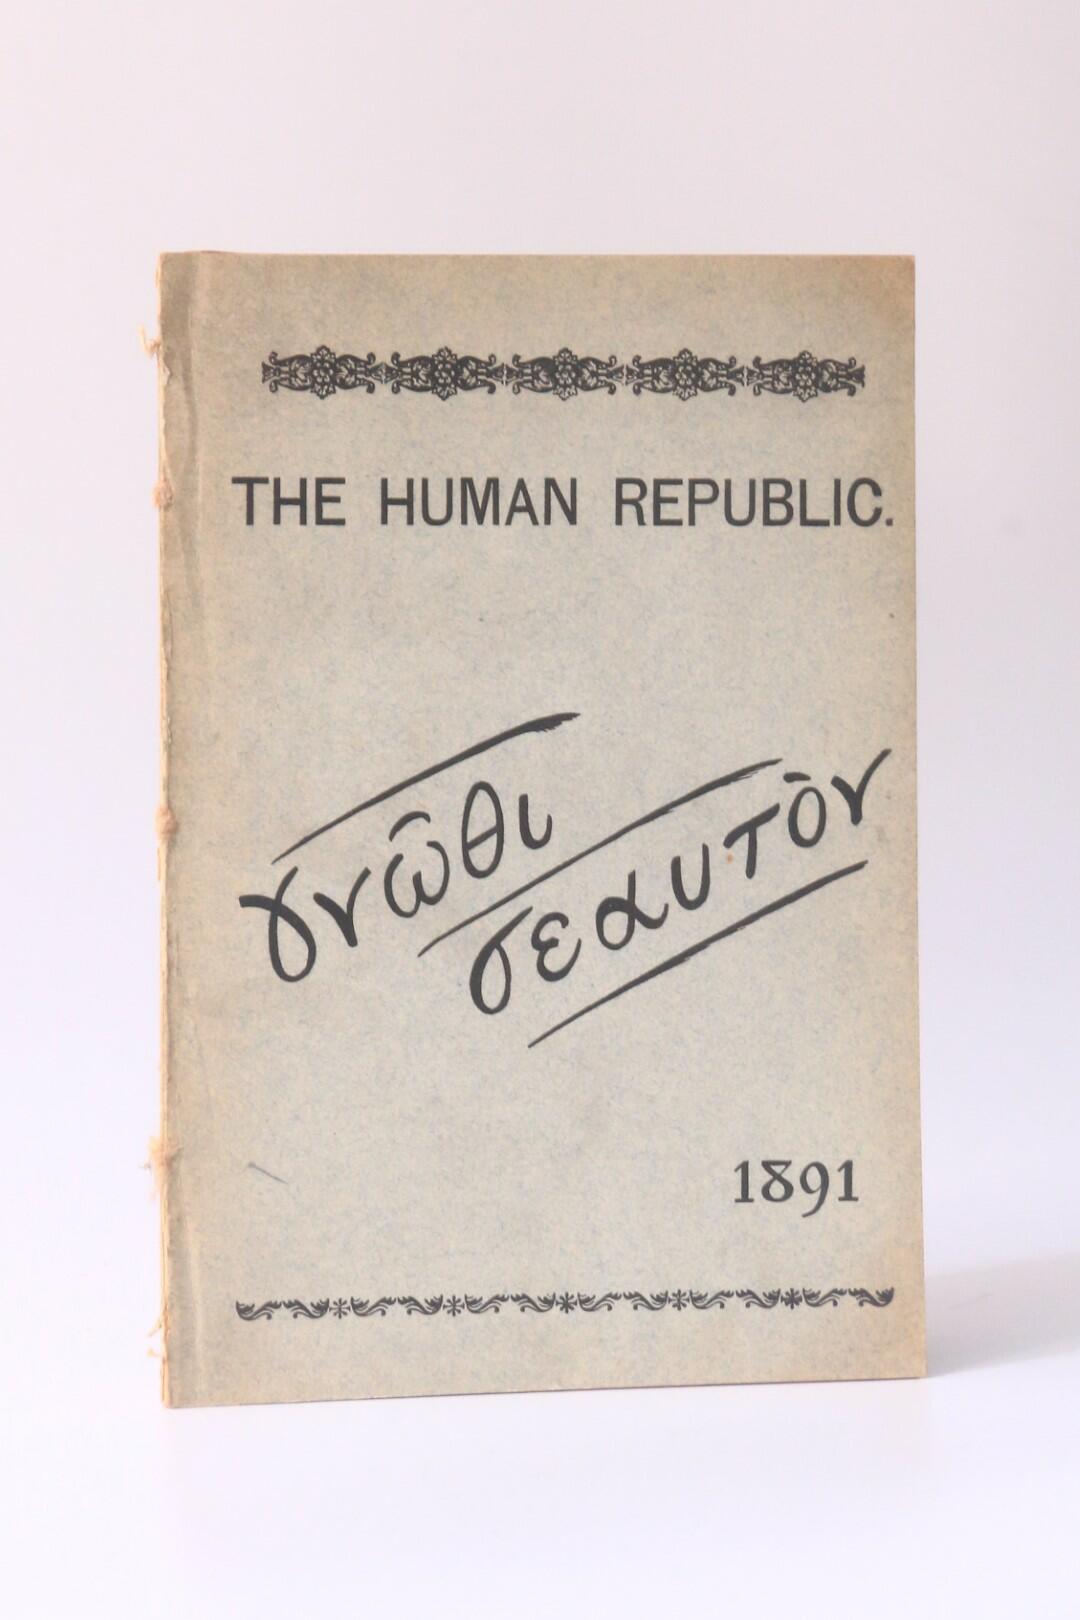 Anonymous [Henry Bigg] - The Human Republic - No Publisher, 1891, First Edition.